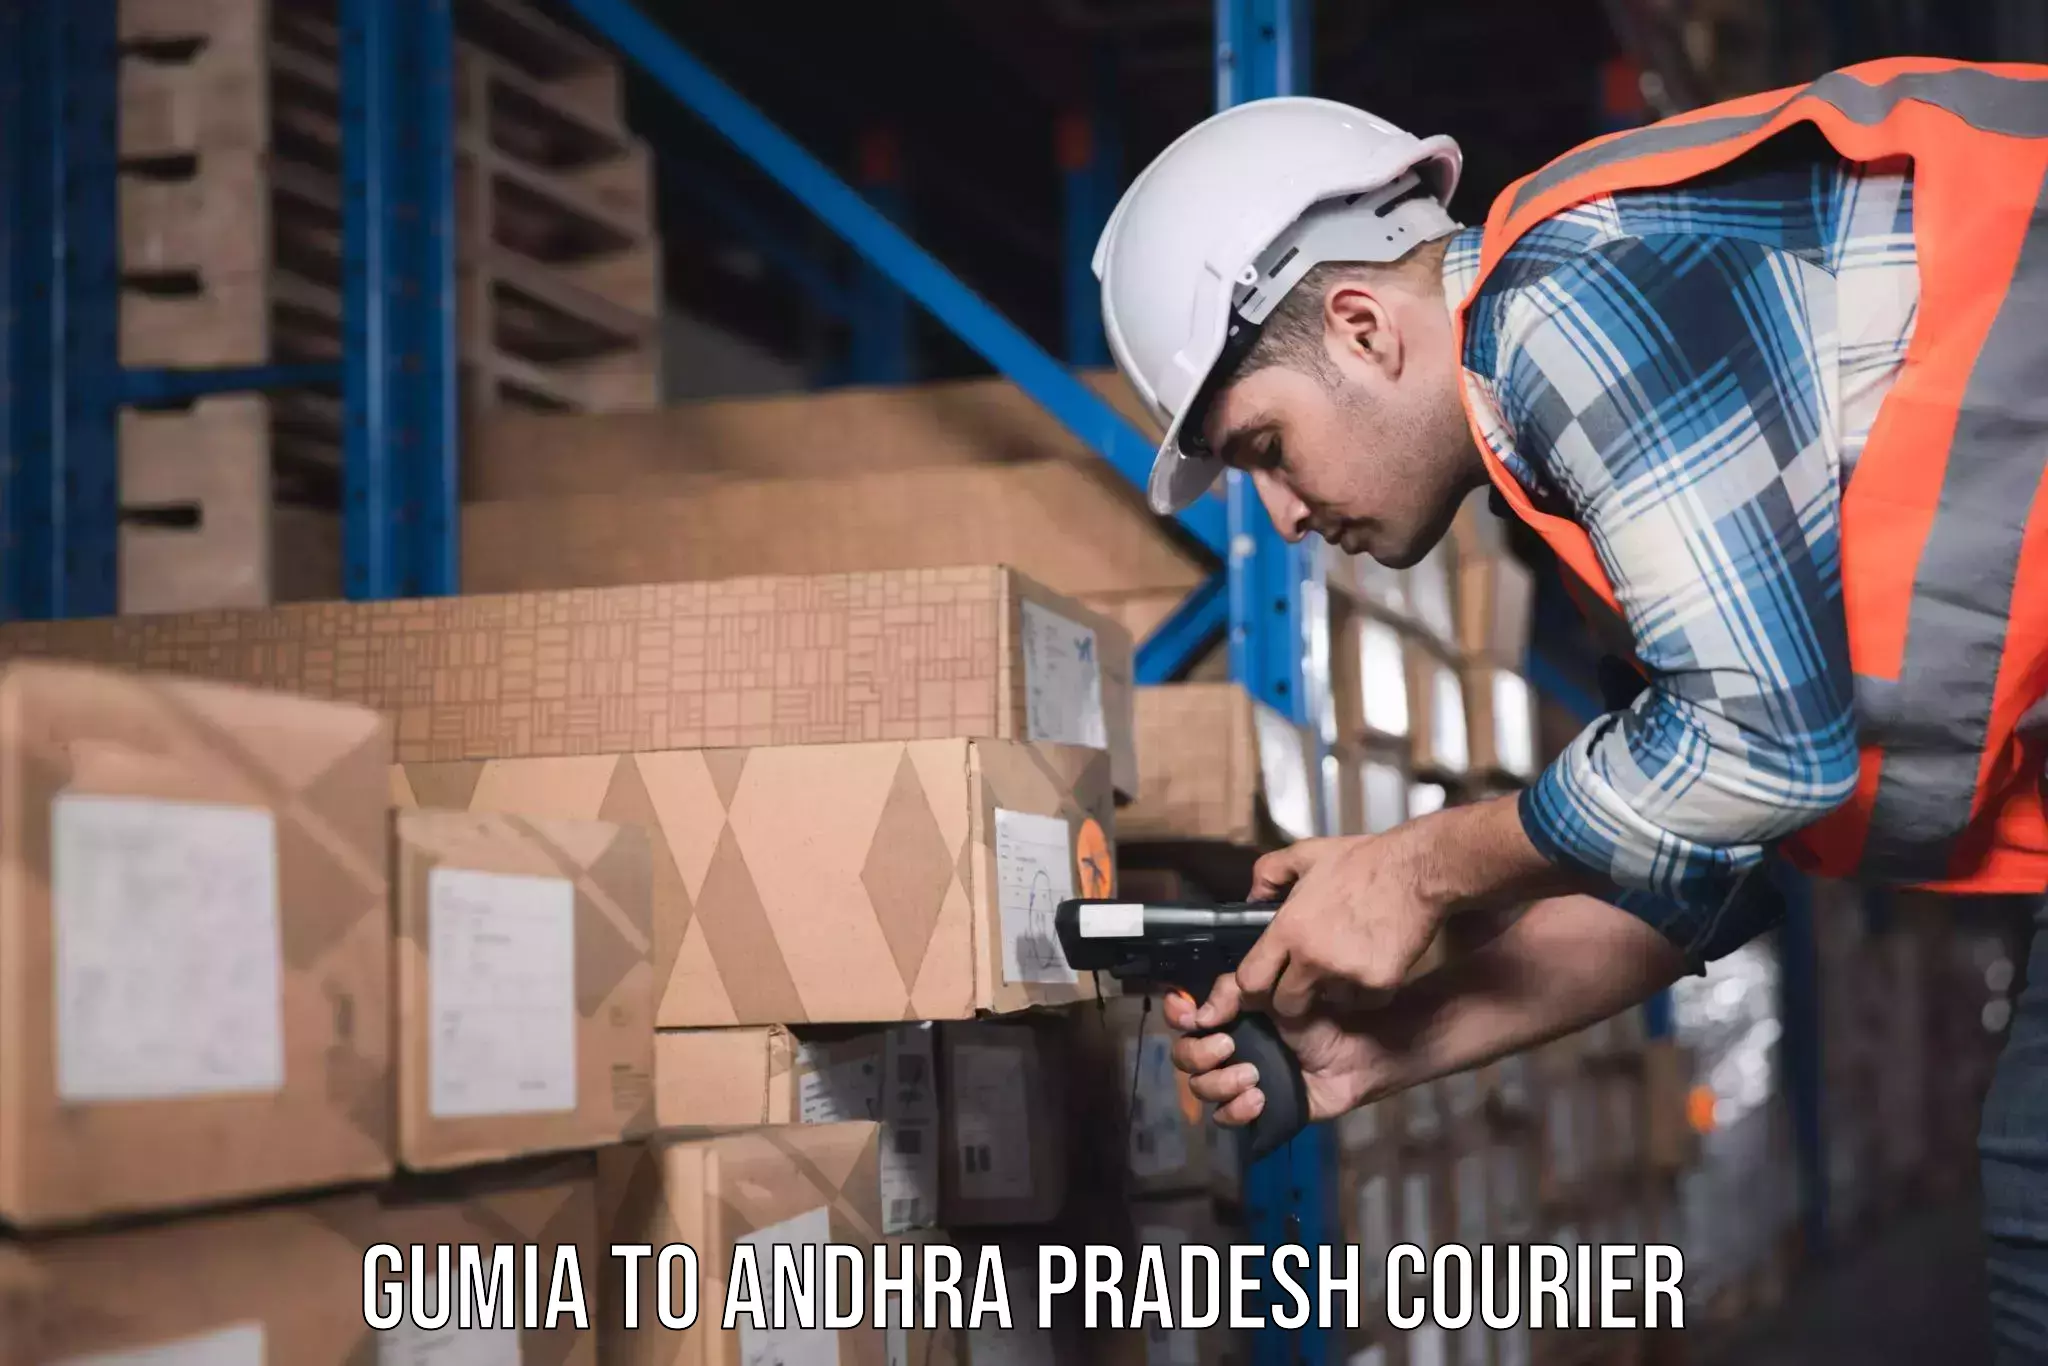 Quality moving company Gumia to Gullapalli